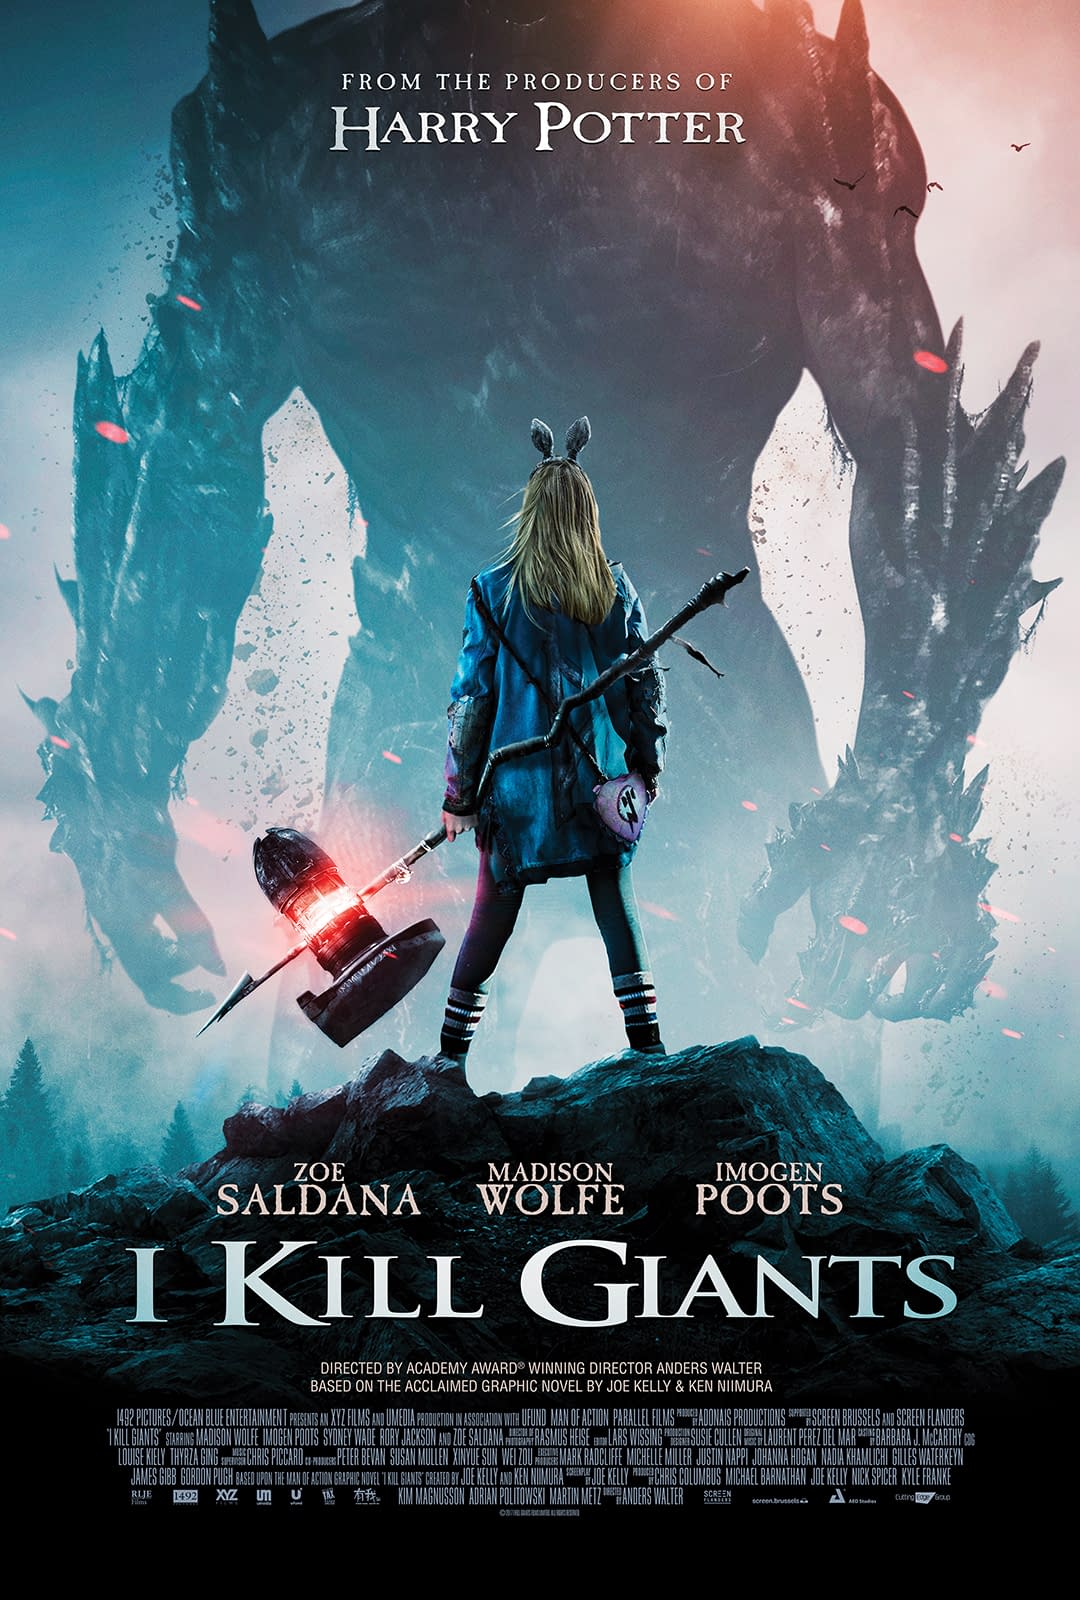 The First Trailer and Poster for I Kill Giants